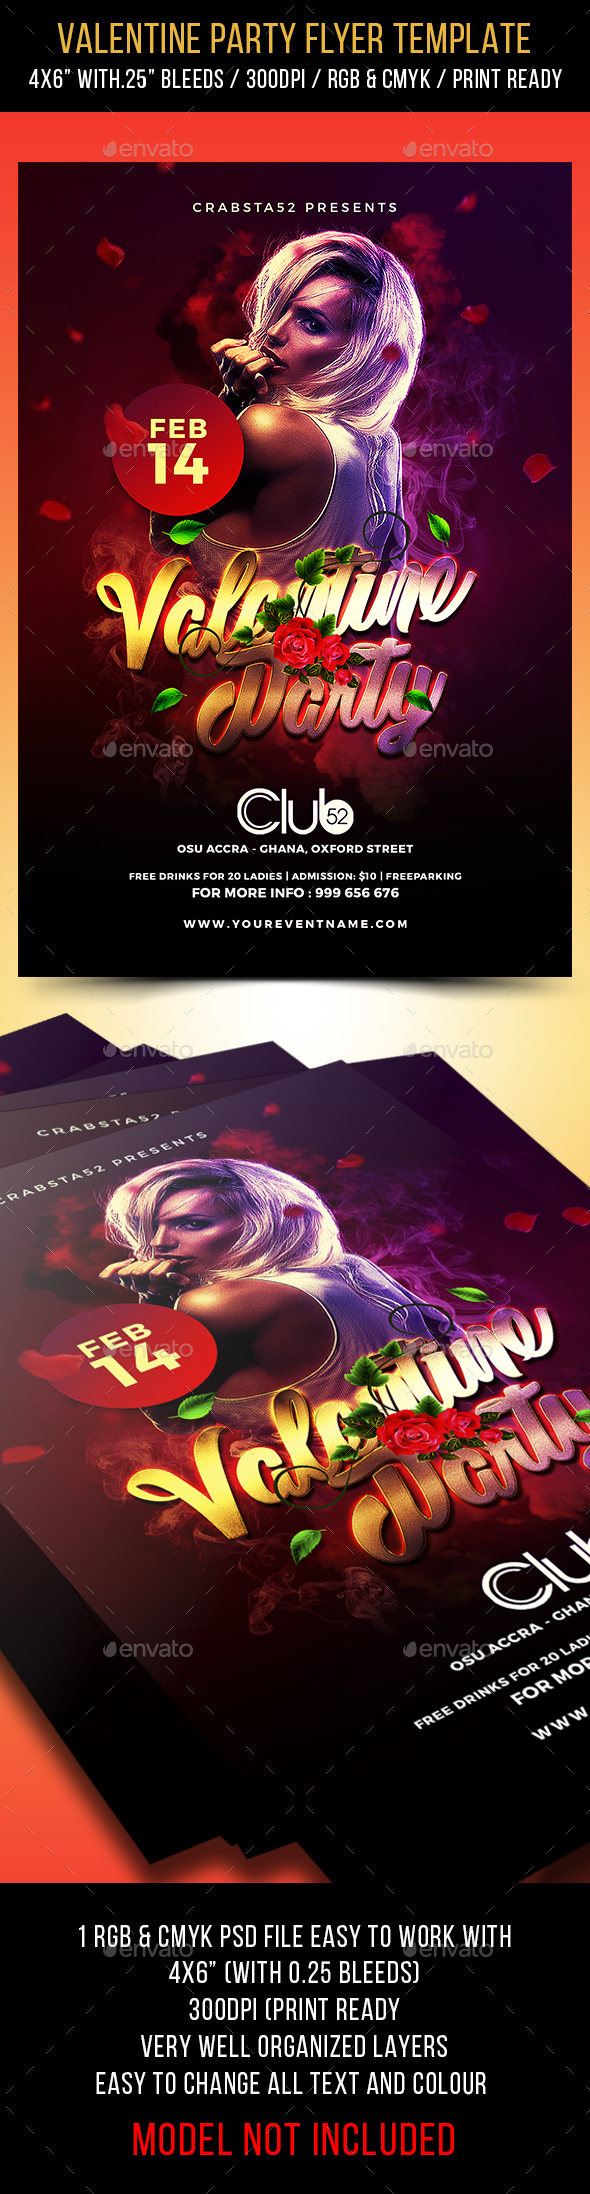 Valentine Party Flyer Template 3